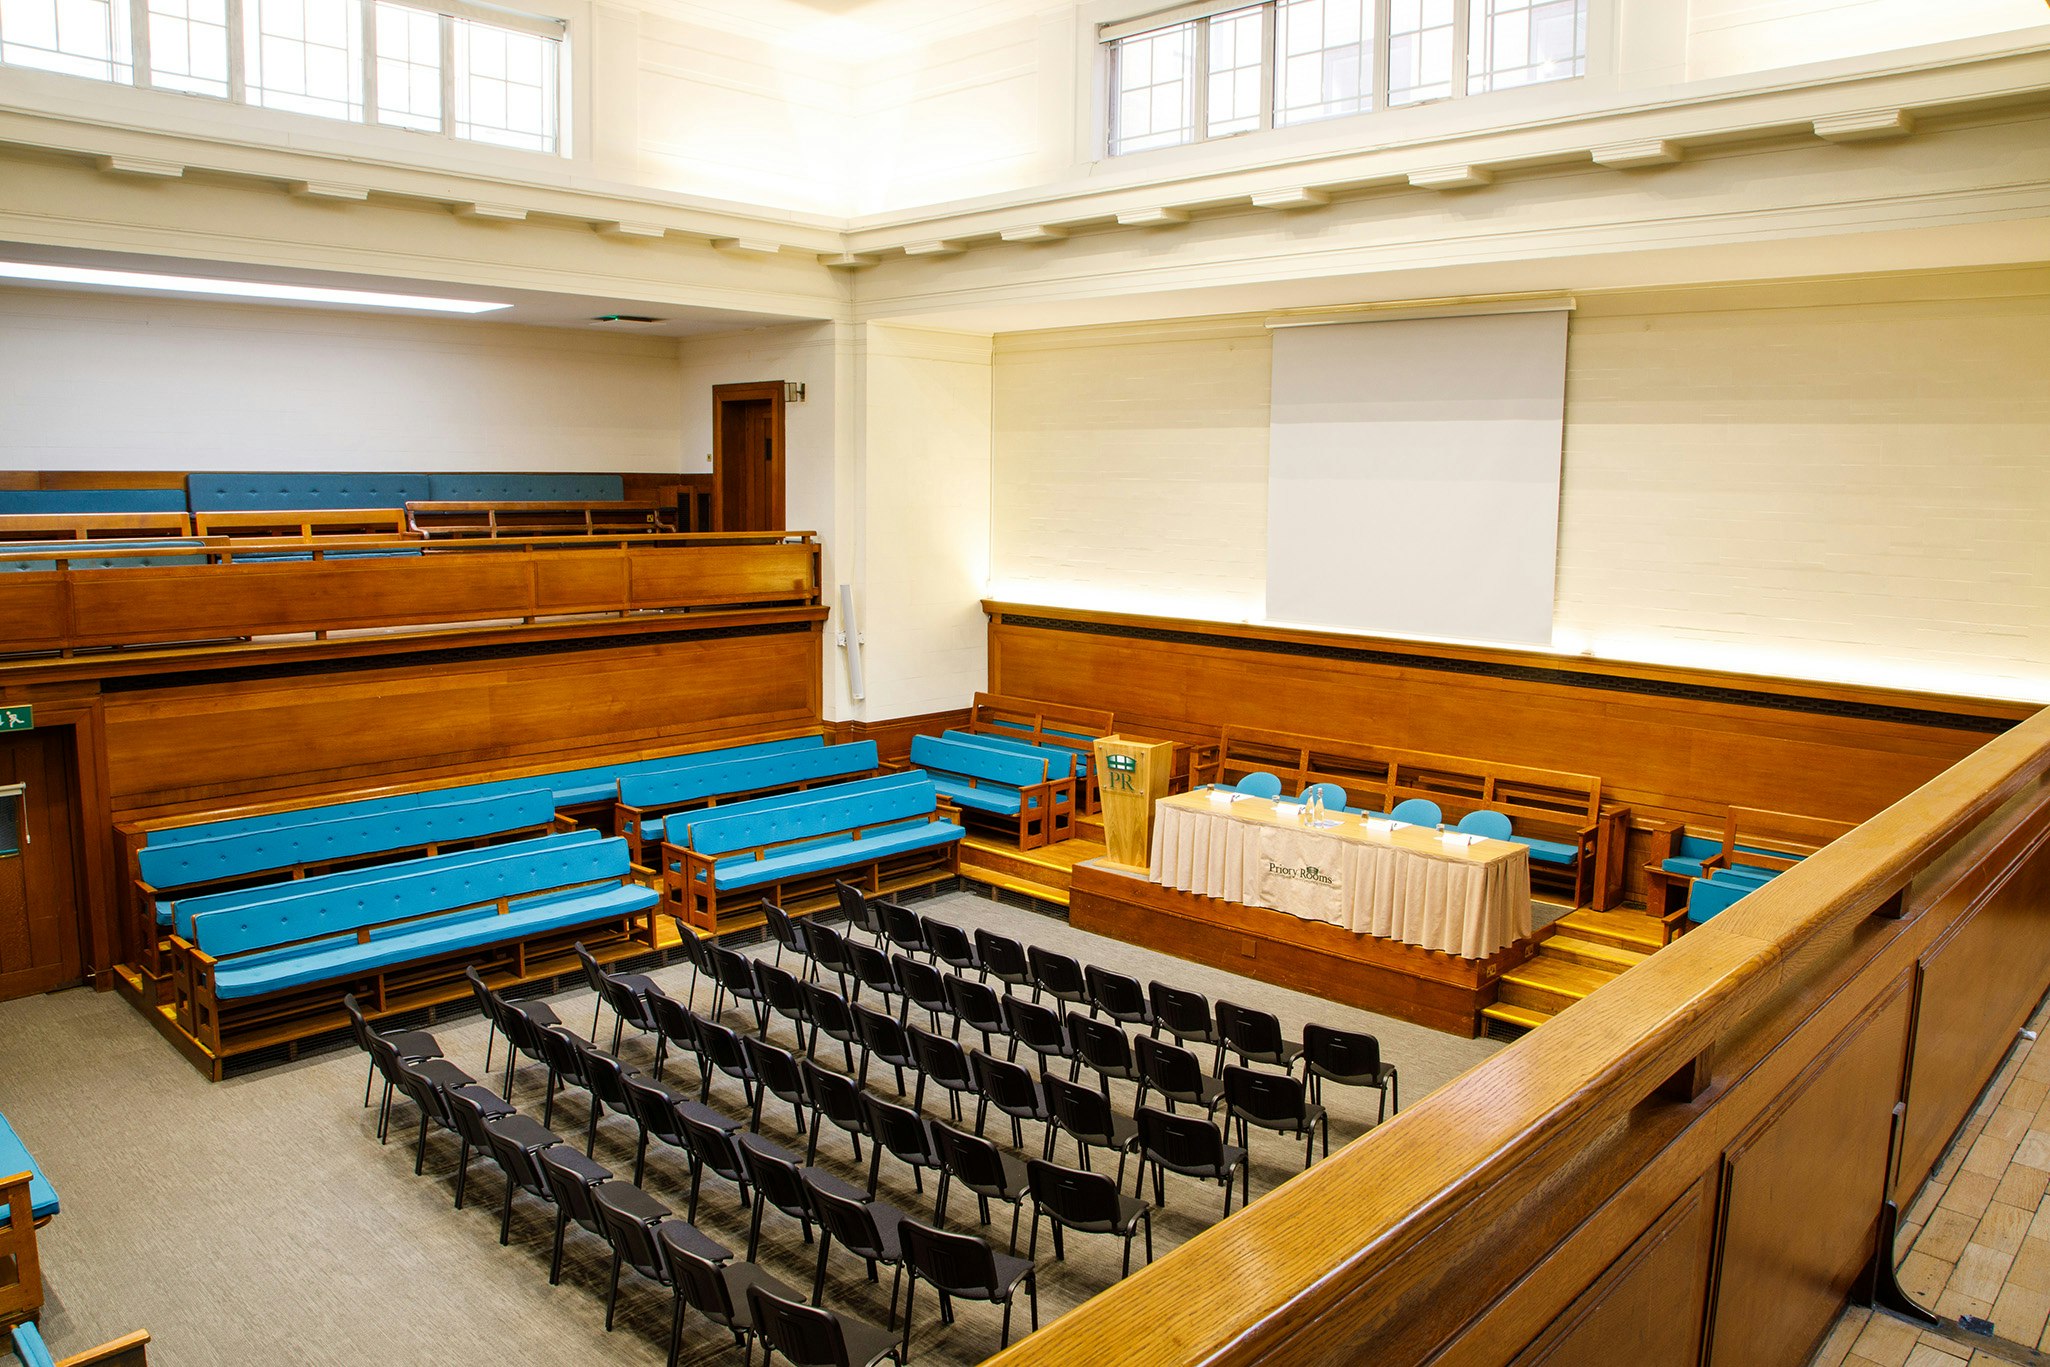 The Priory Rooms Meeting and Conference Centre  - Main Meeting House  image 2